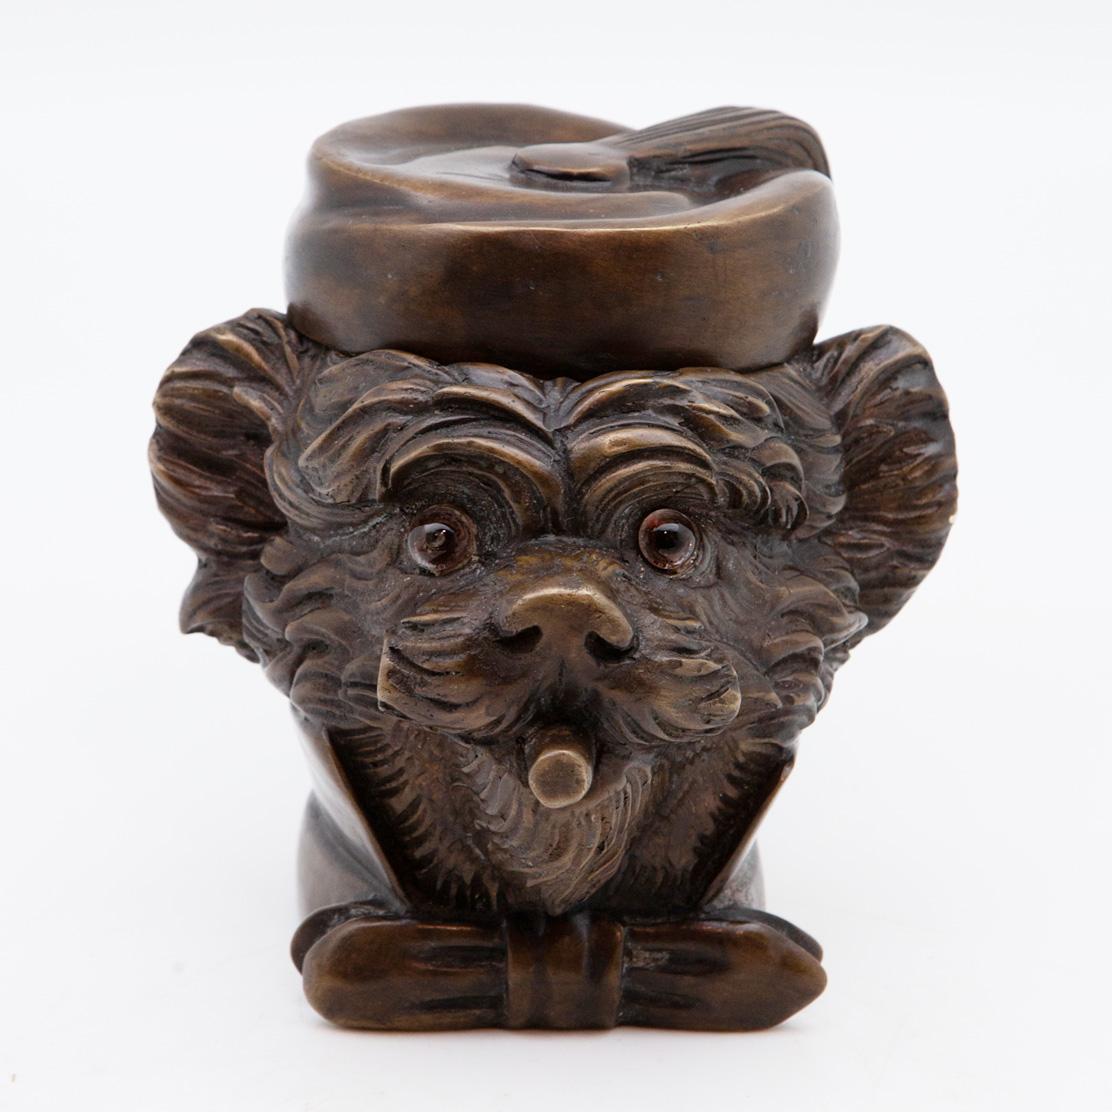 19th century French Yorkie tobacco jar. Bronze Yorkie dog with glass eyes. Smoking a cigar wearing a bowtie and CAP.